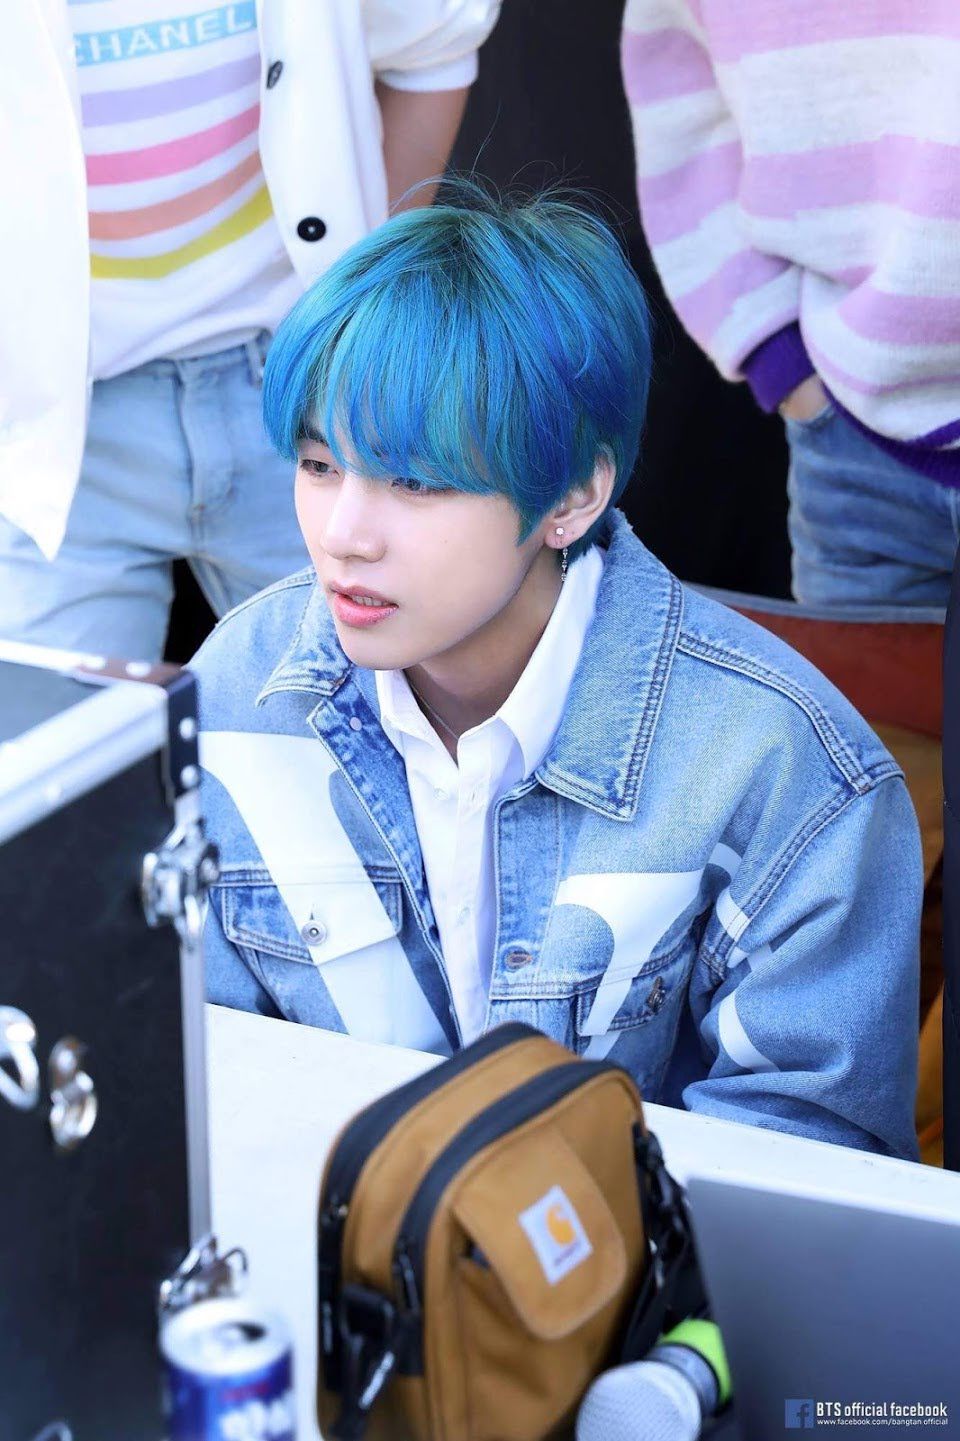 BTS’s V with blue hair